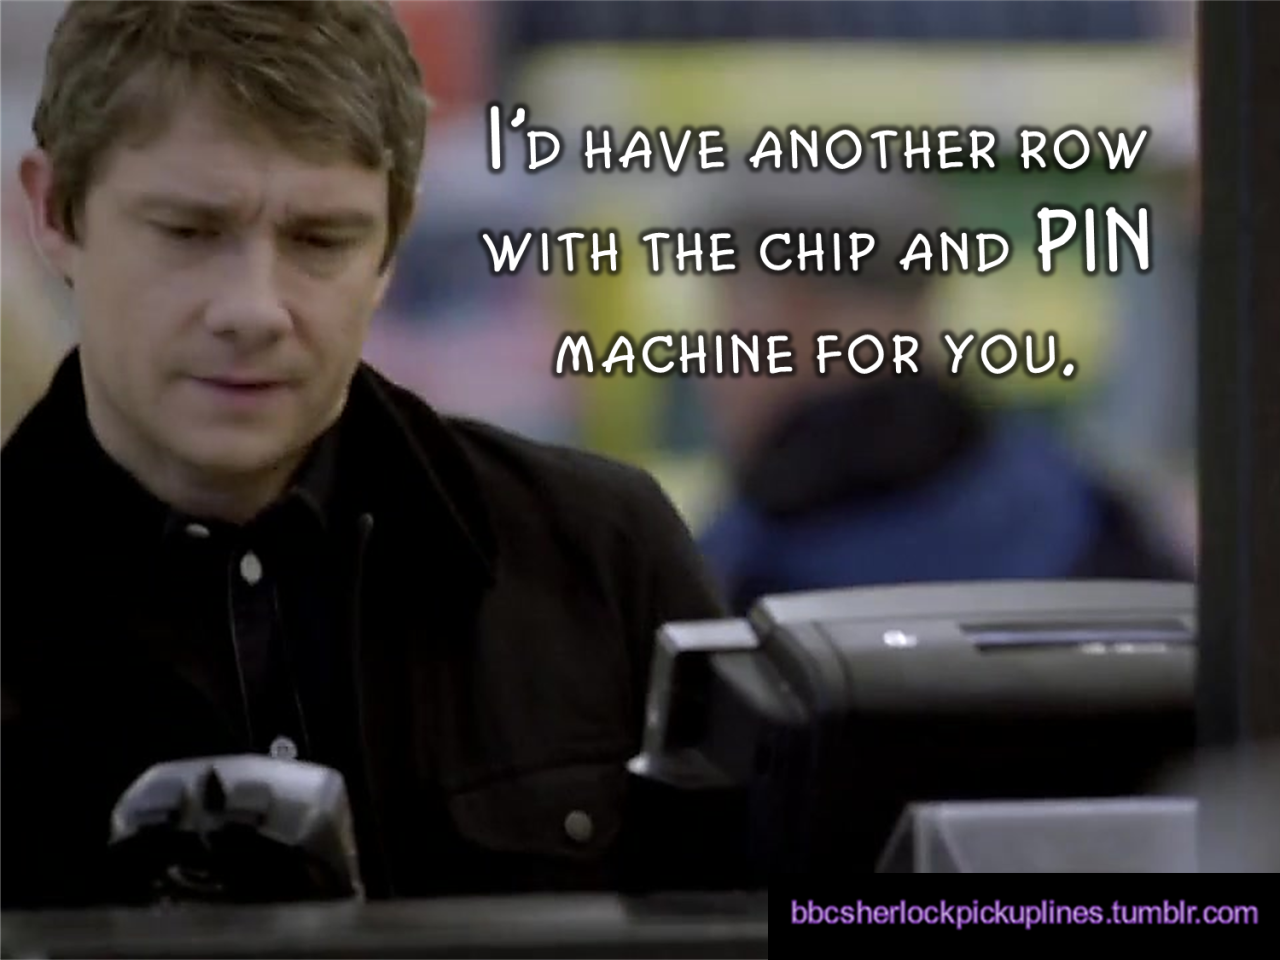 &ldquo;I&rsquo;d have another row with the chip and PIN machine for you.&rdquo;